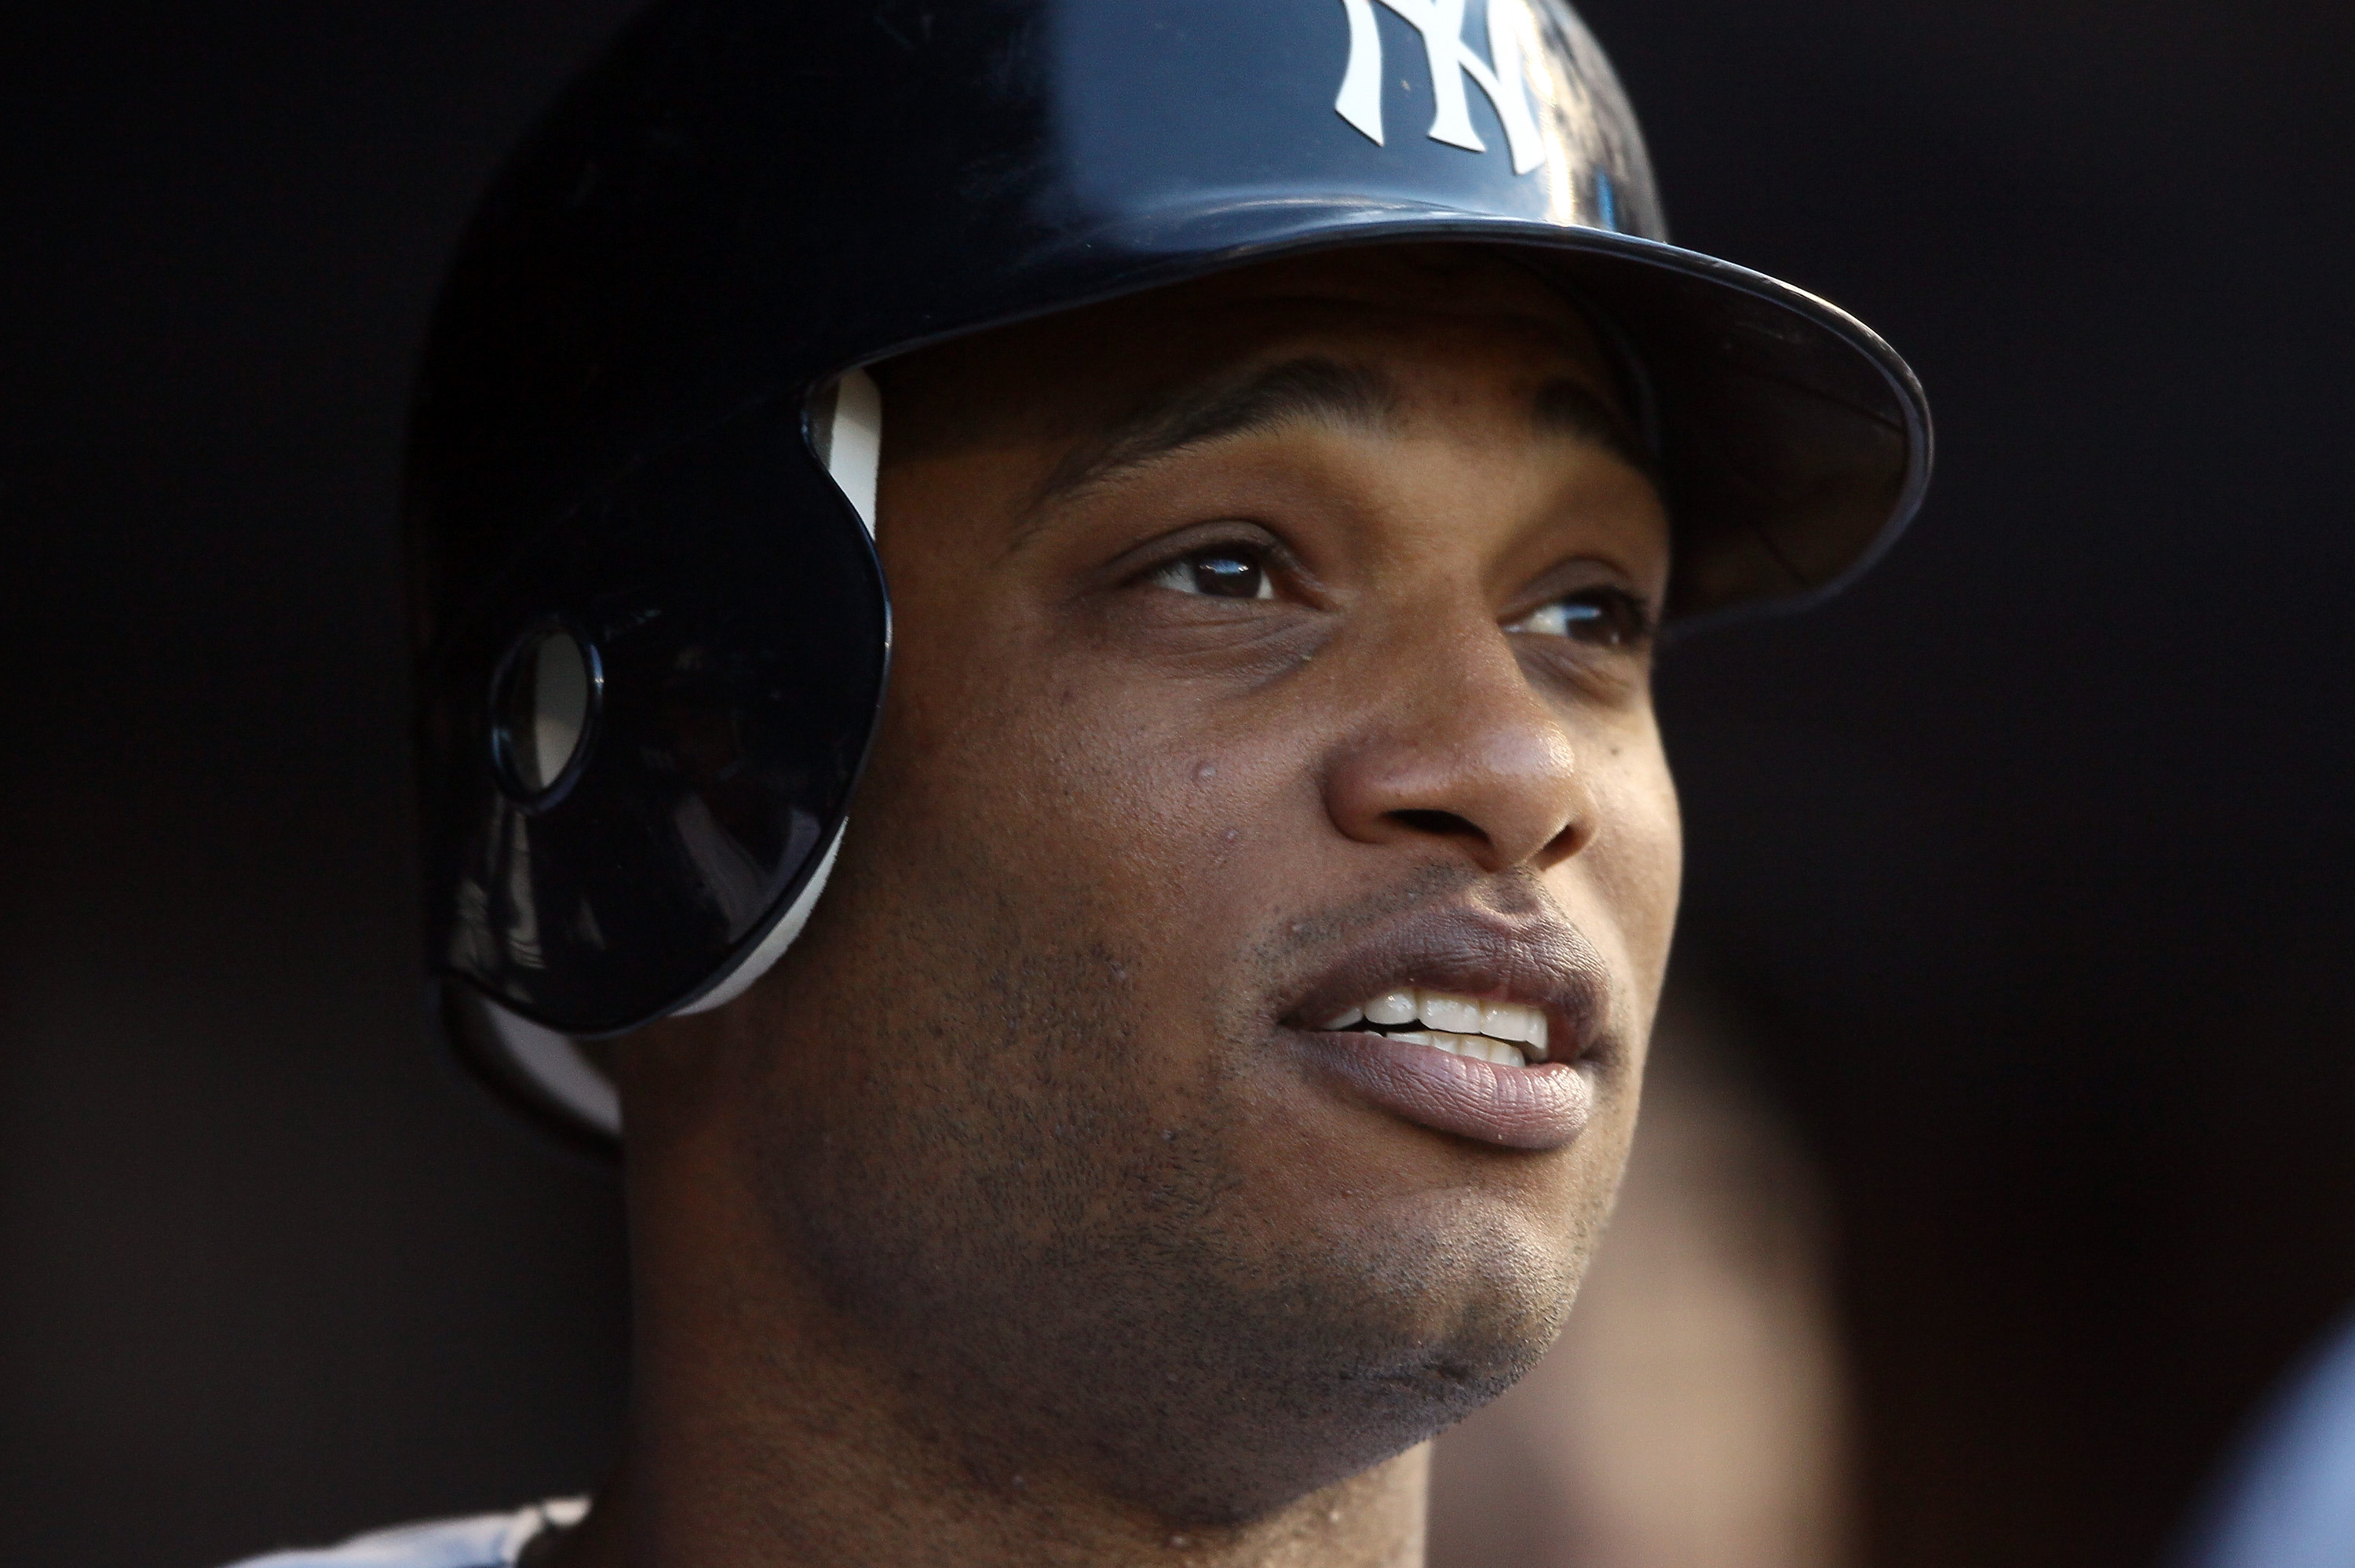 NY Yankees react to Robinson Cano's 80-game PED suspension